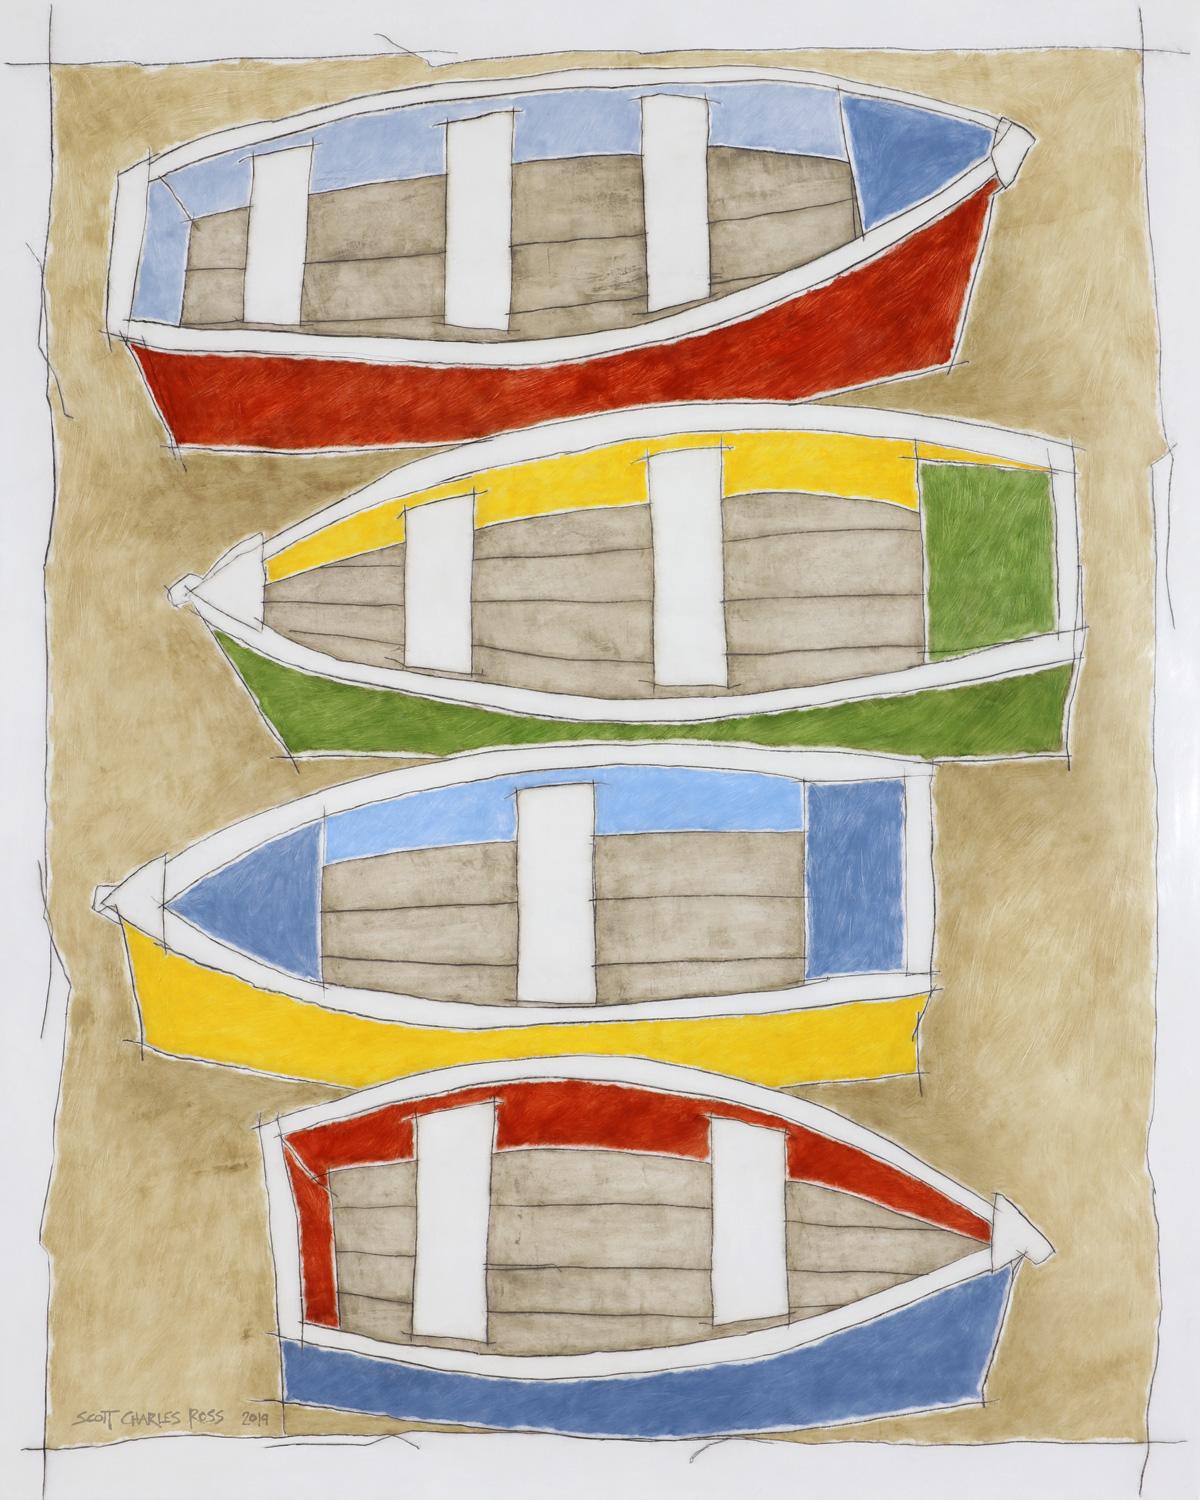 Scott Charles Ross  Landscape Painting - Four Boats (Earth color oil painting on linen stretched on panel)